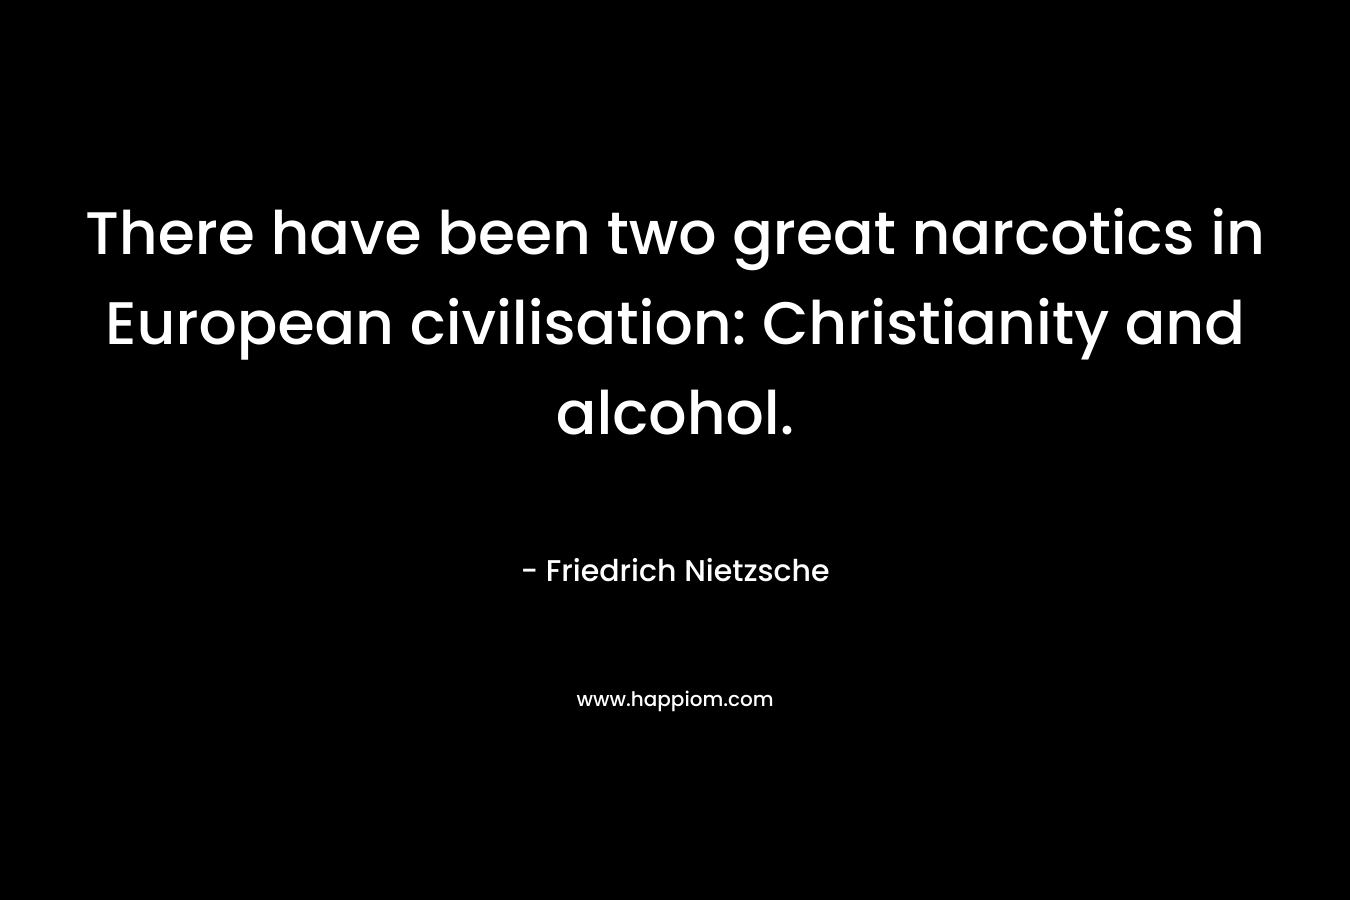 There have been two great narcotics in European civilisation: Christianity and alcohol.